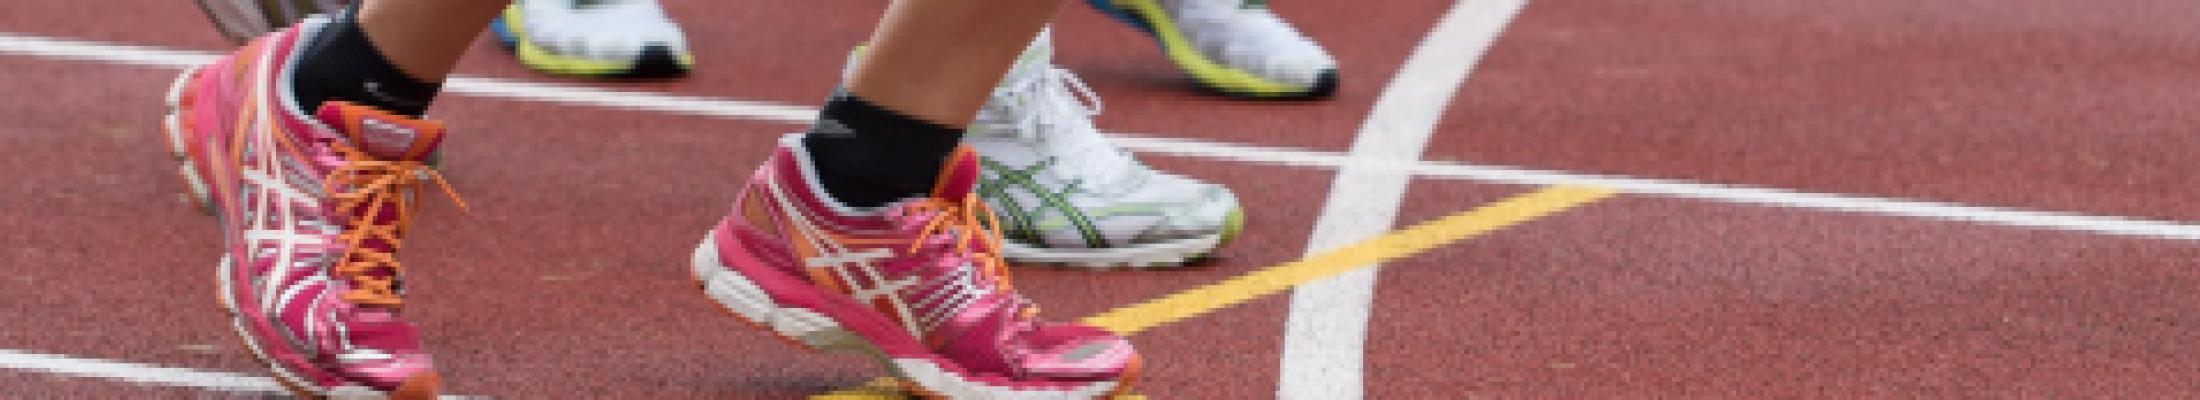 close up of shoes runnign on a track